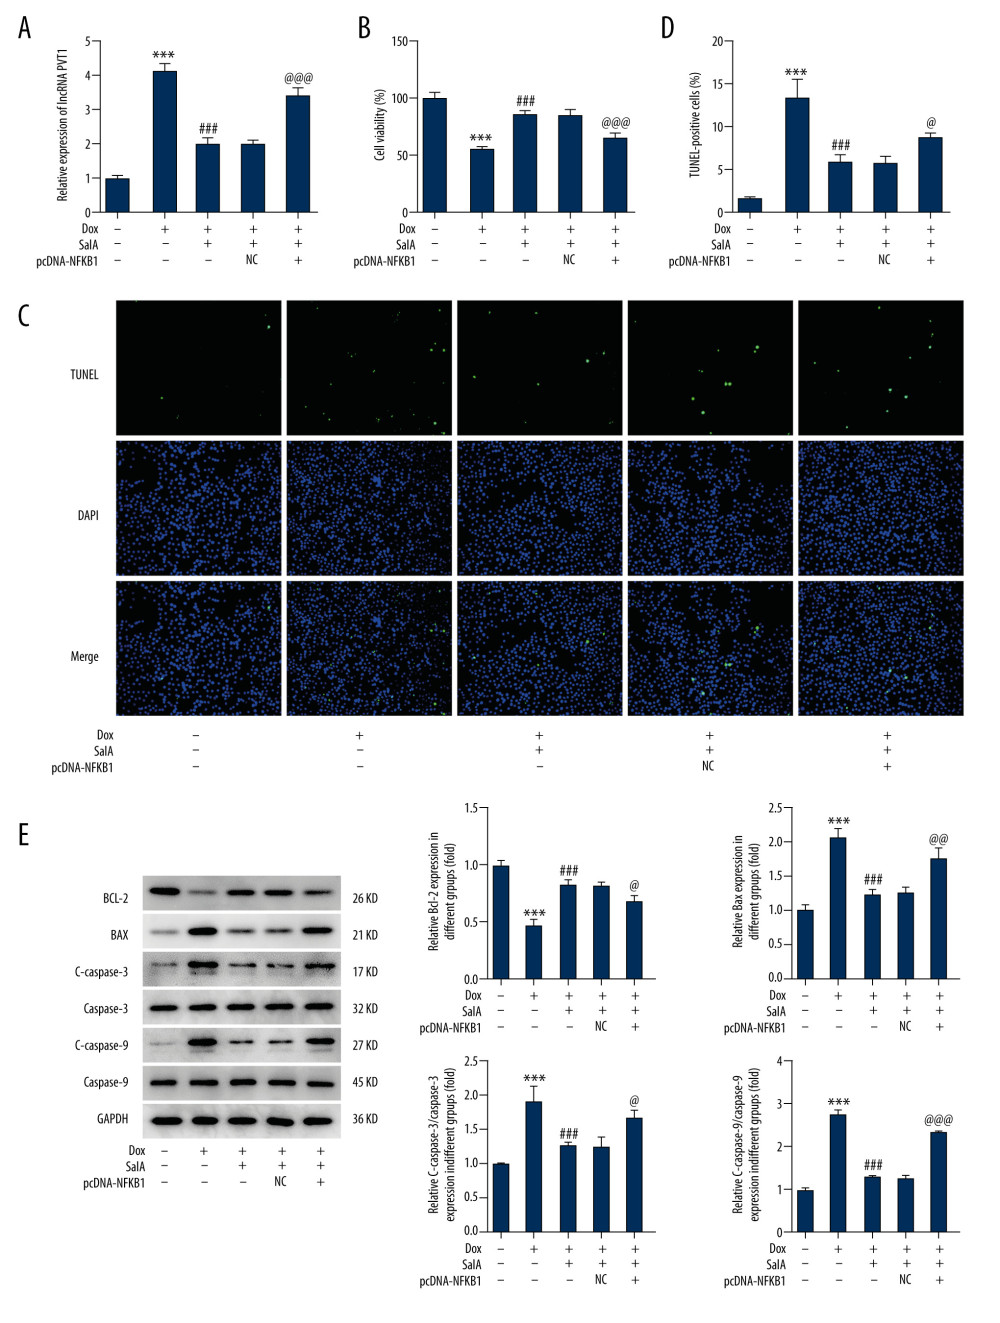 The effect of nuclear factor kappa B subunit 1 (NFKB1) overexpression on salvianolic acid A (SalA)-inhibited apoptosis in H9C2 cells. (A) The expression of plasmacytoma variant translocation 1 (PVT1) in H9C2 cells. (B) Cell viability of H9C2 cells that were subjected to indicated treatments. (C, D) Representative images (×200) and quantitative analysis for TUNEL staining in H9C2 cells. (E) The expression of proteins related to apoptosis in H9C2 cells was detected by western blot. *** P<0.001; ### P<0.001. @ P<0.05; @@ P<0.01; @@@ P<0.001.